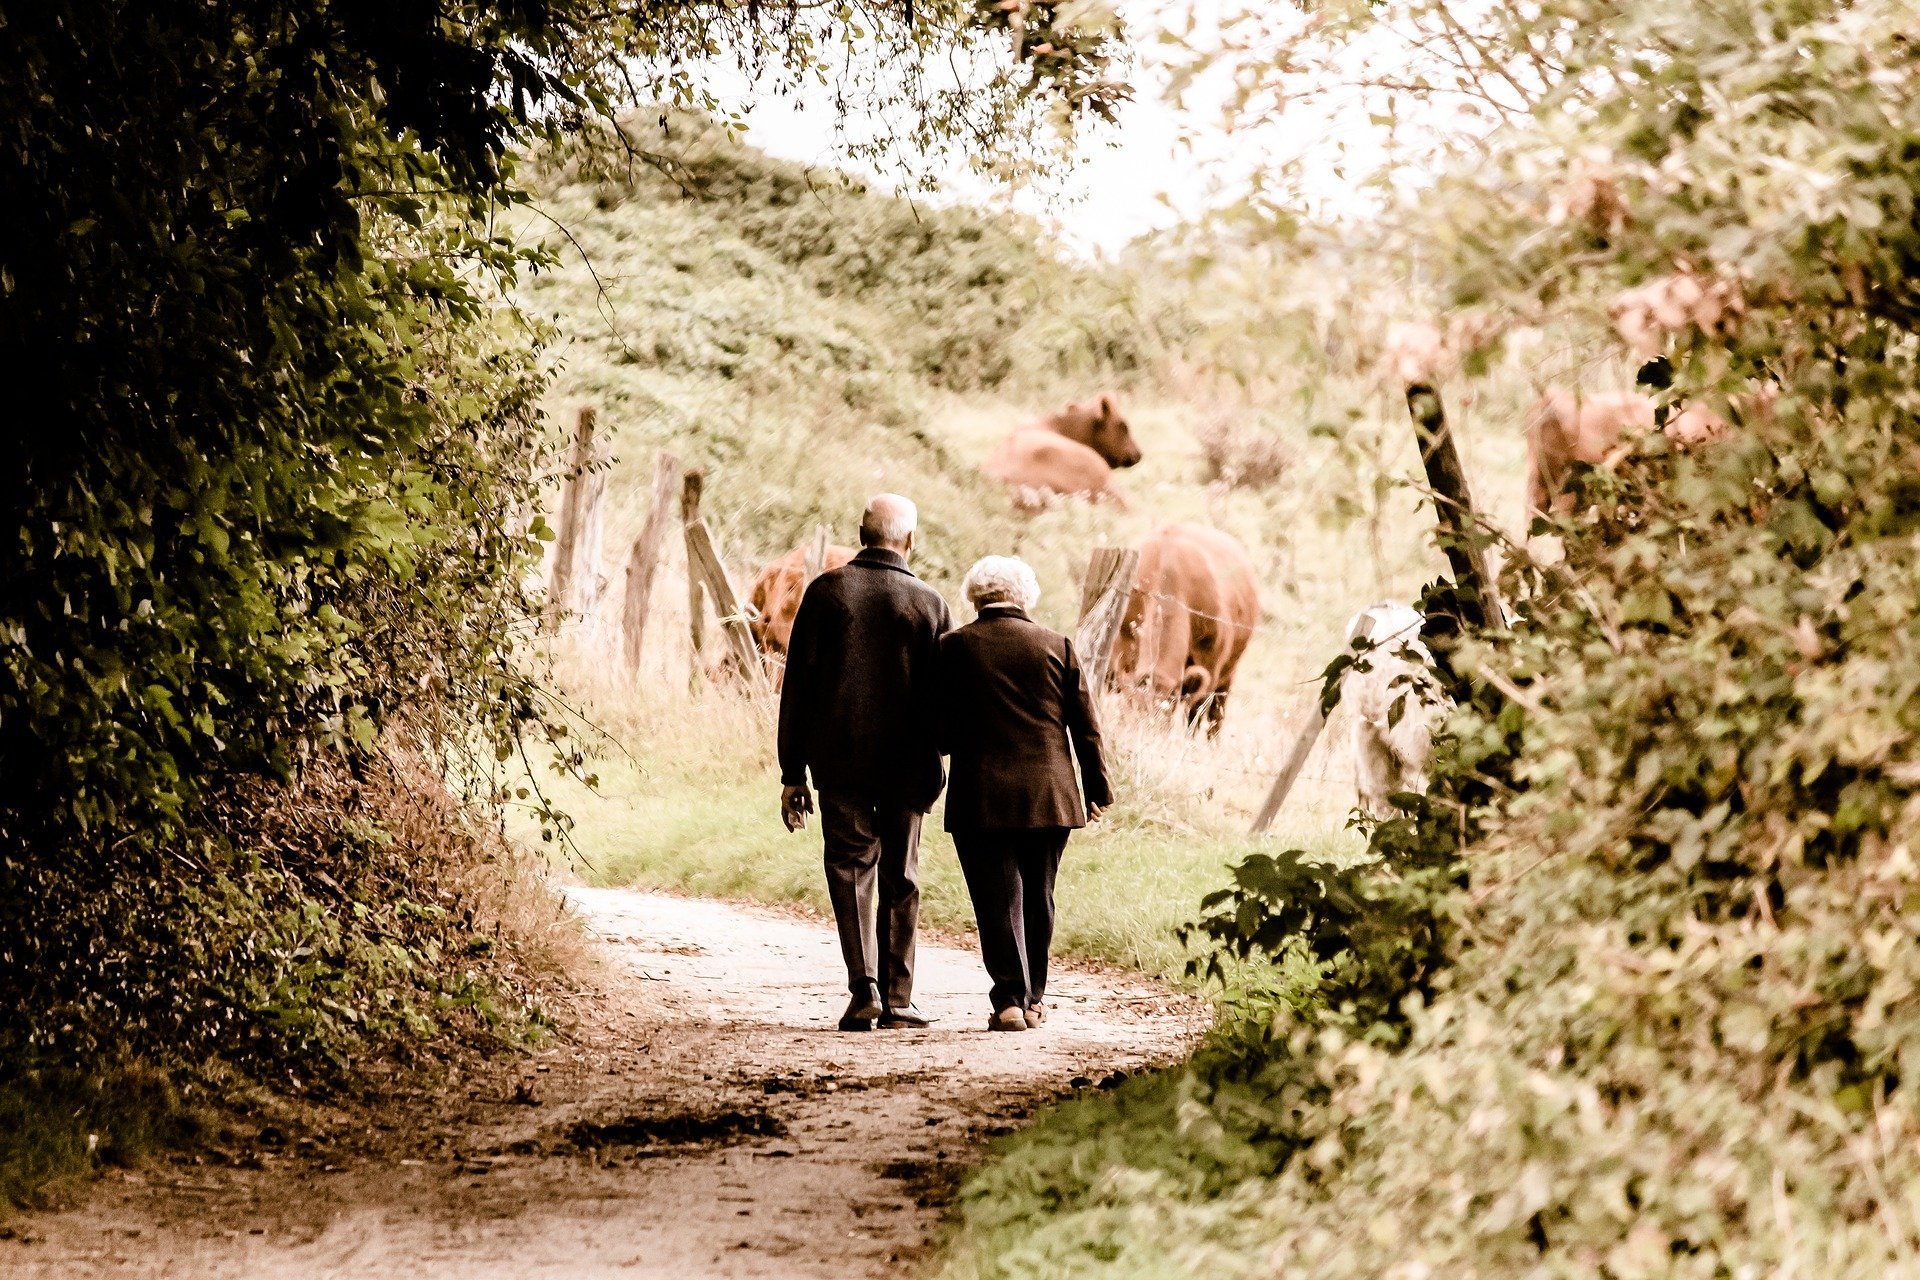 An elderly couple out on a walk in nature. | Source: Pixabay.